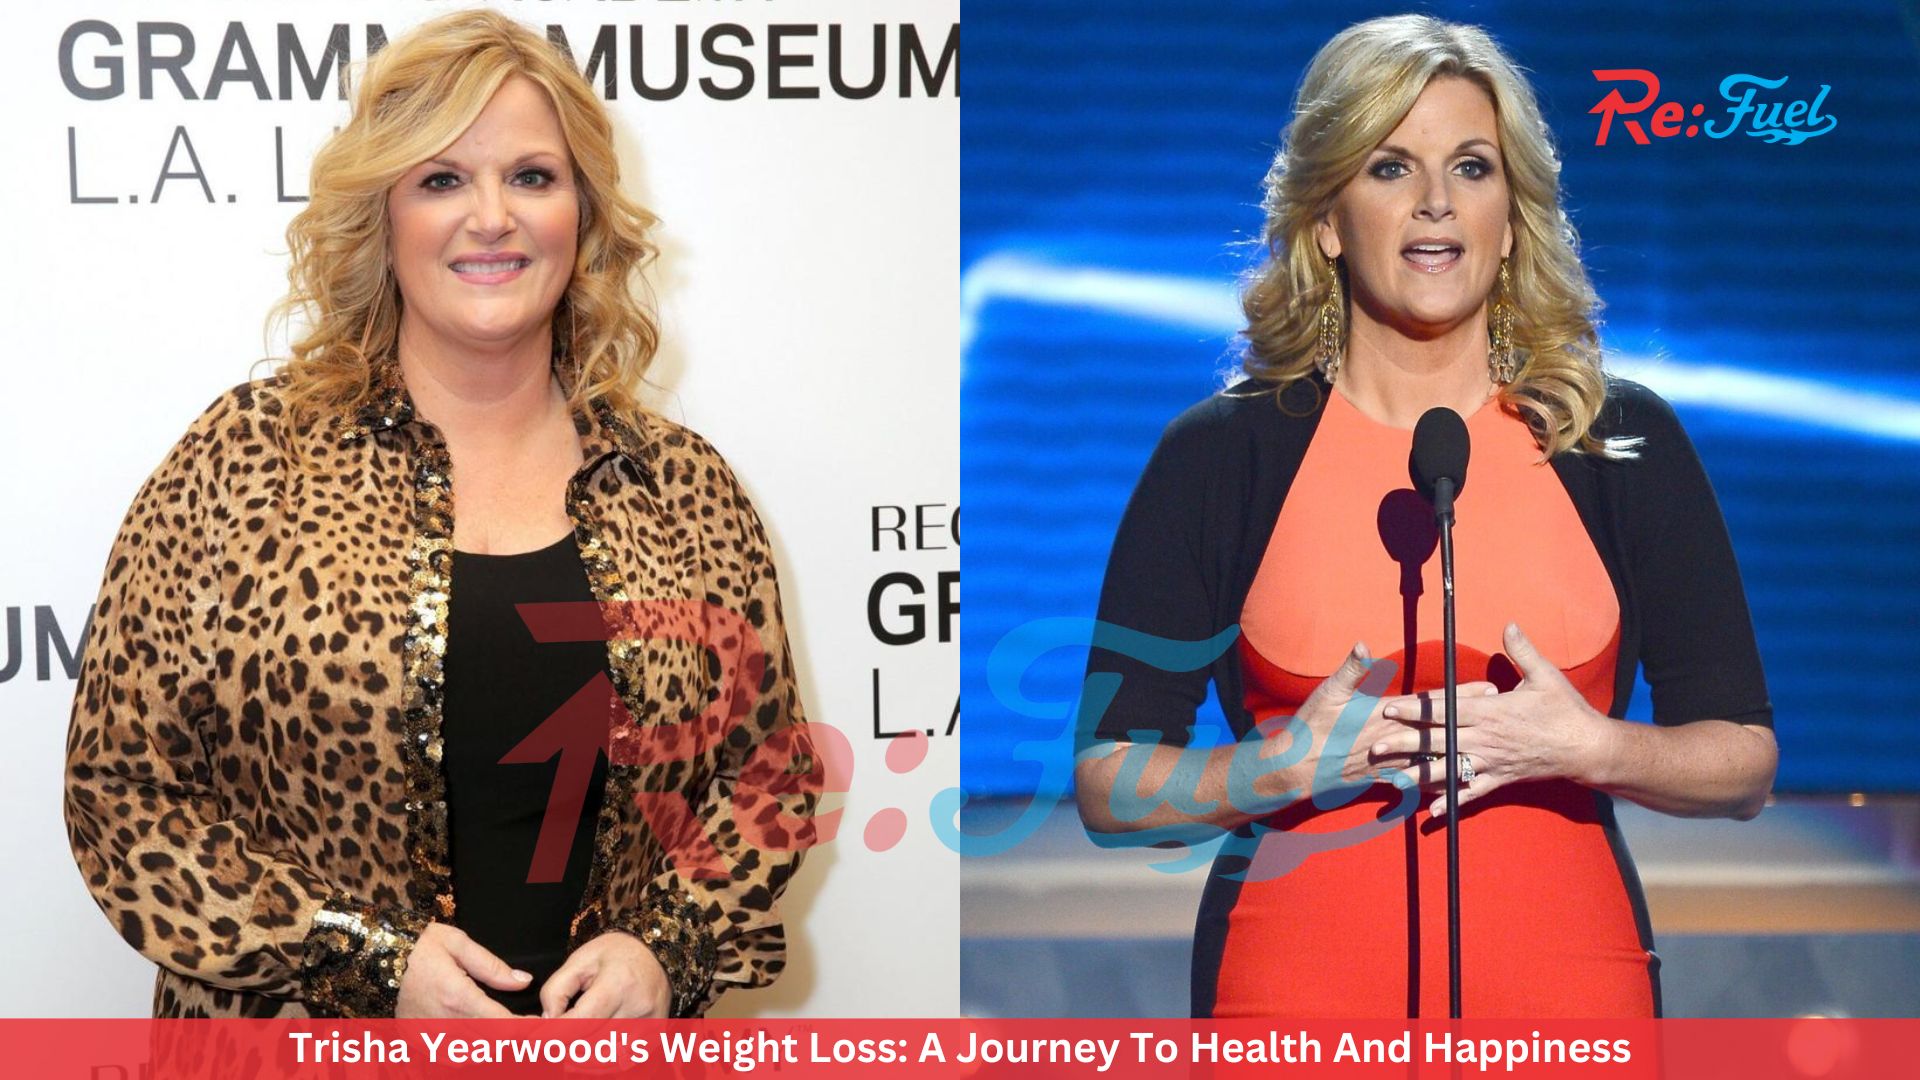 Trisha Yearwood's Weight Loss: A Journey To Health And Happiness